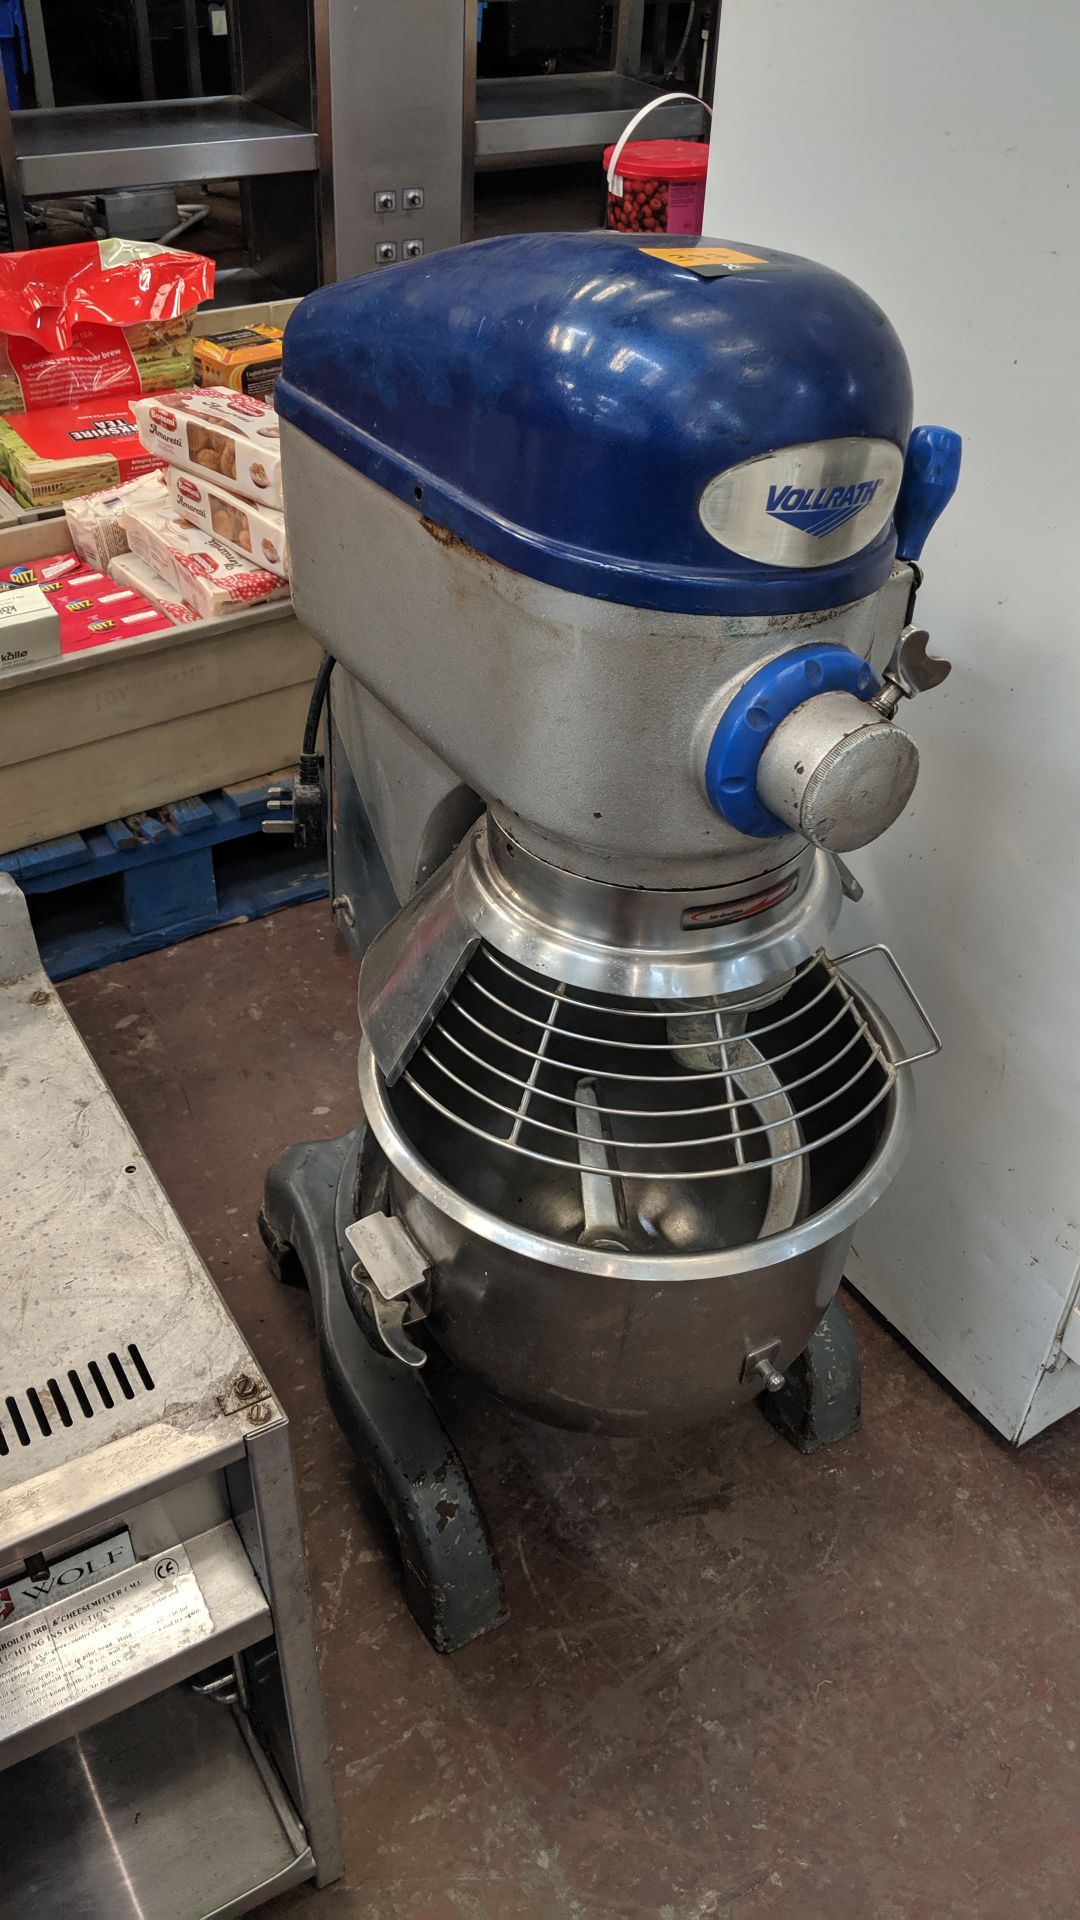 Vollrath floorstanding heavy-duty commercial mixer including bowl & pair of blades IMPORTANT: Please